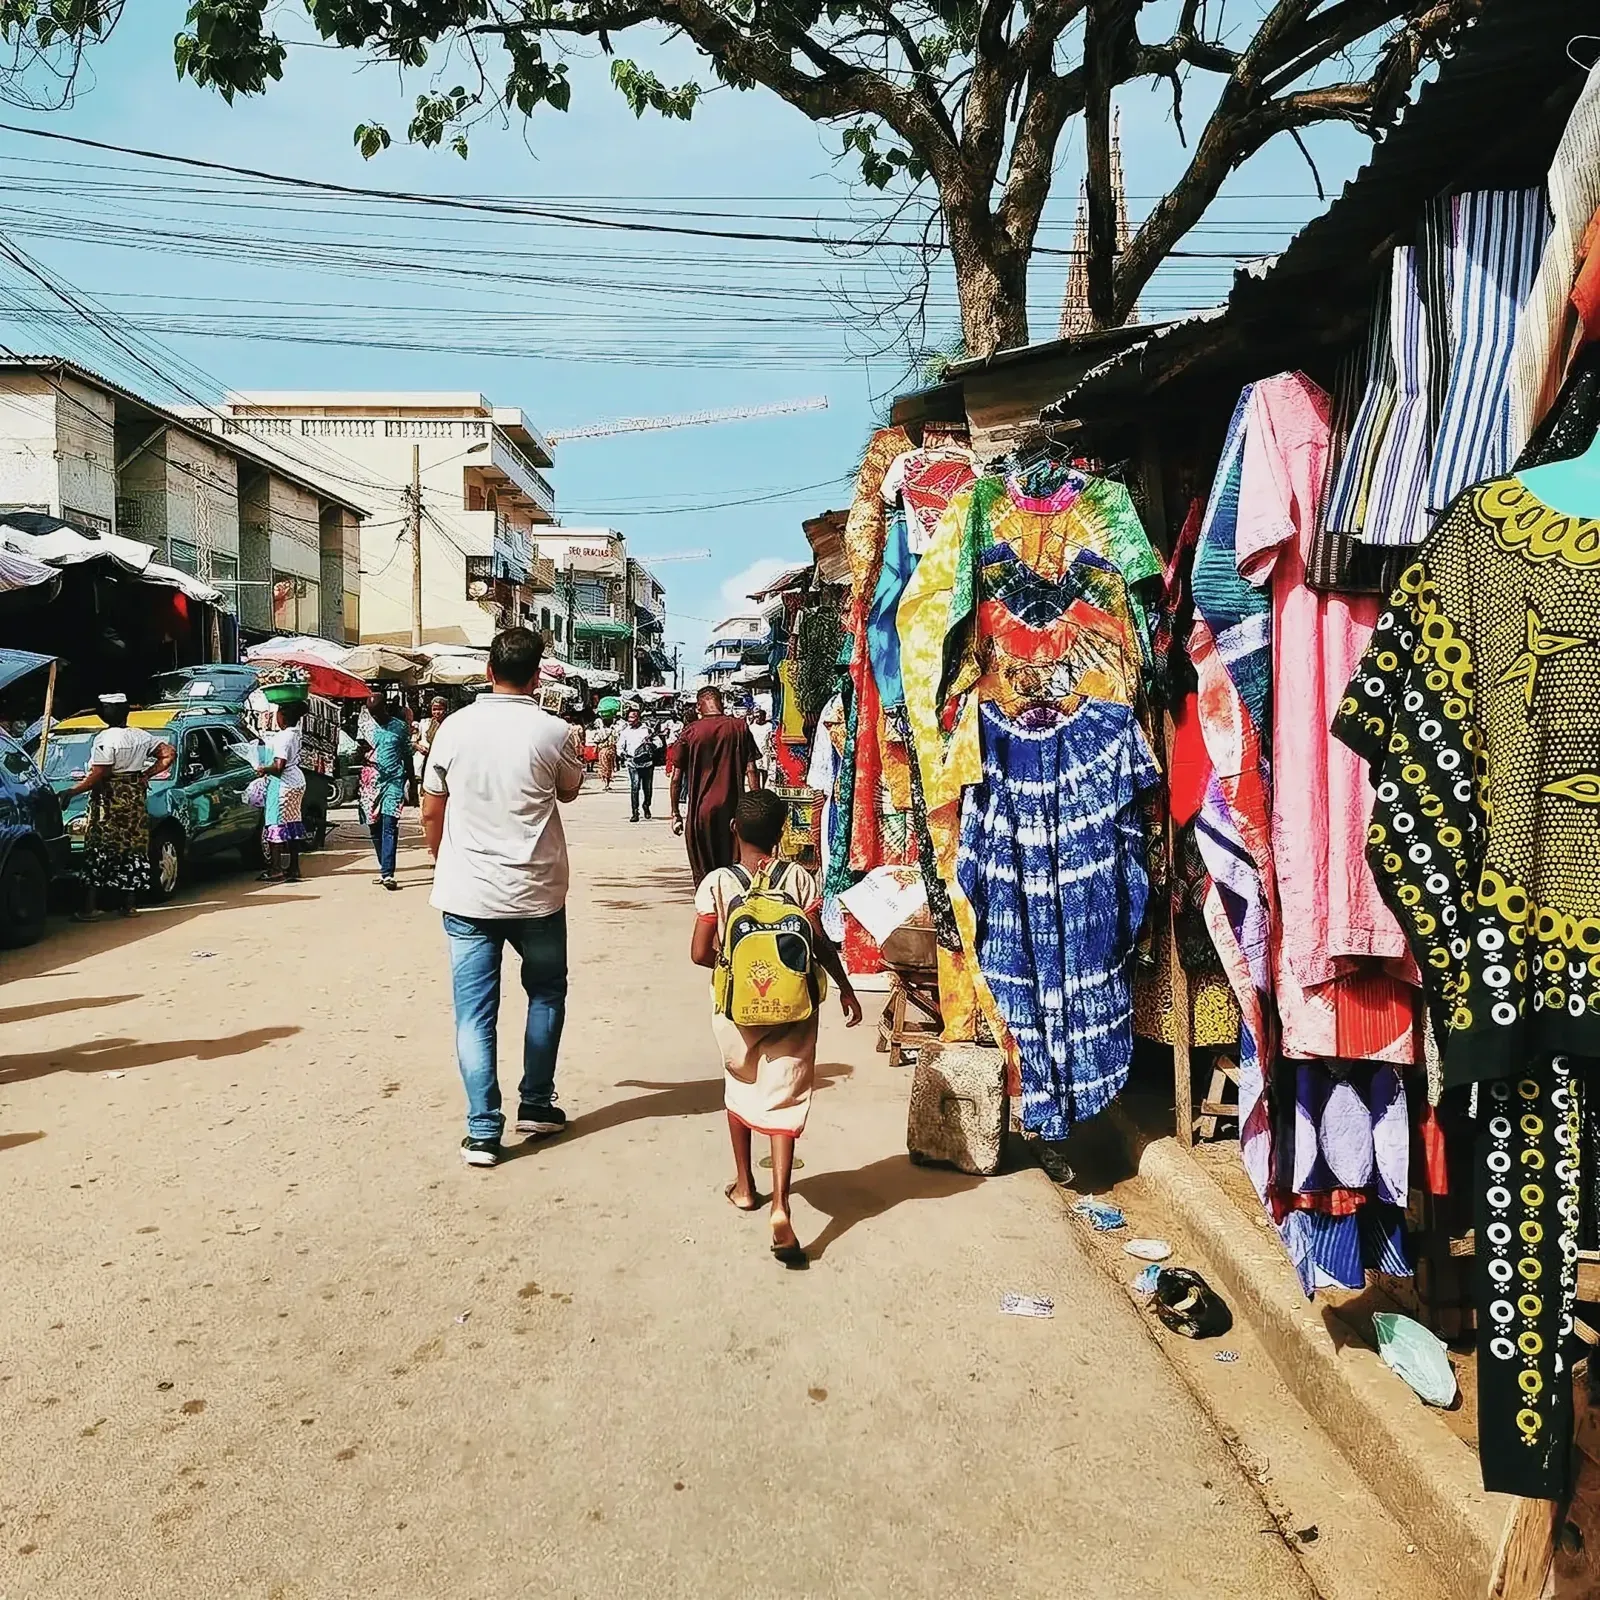 Bustling street market in Lomé, Togo with vibrant clothing and a snake resting on the ground.